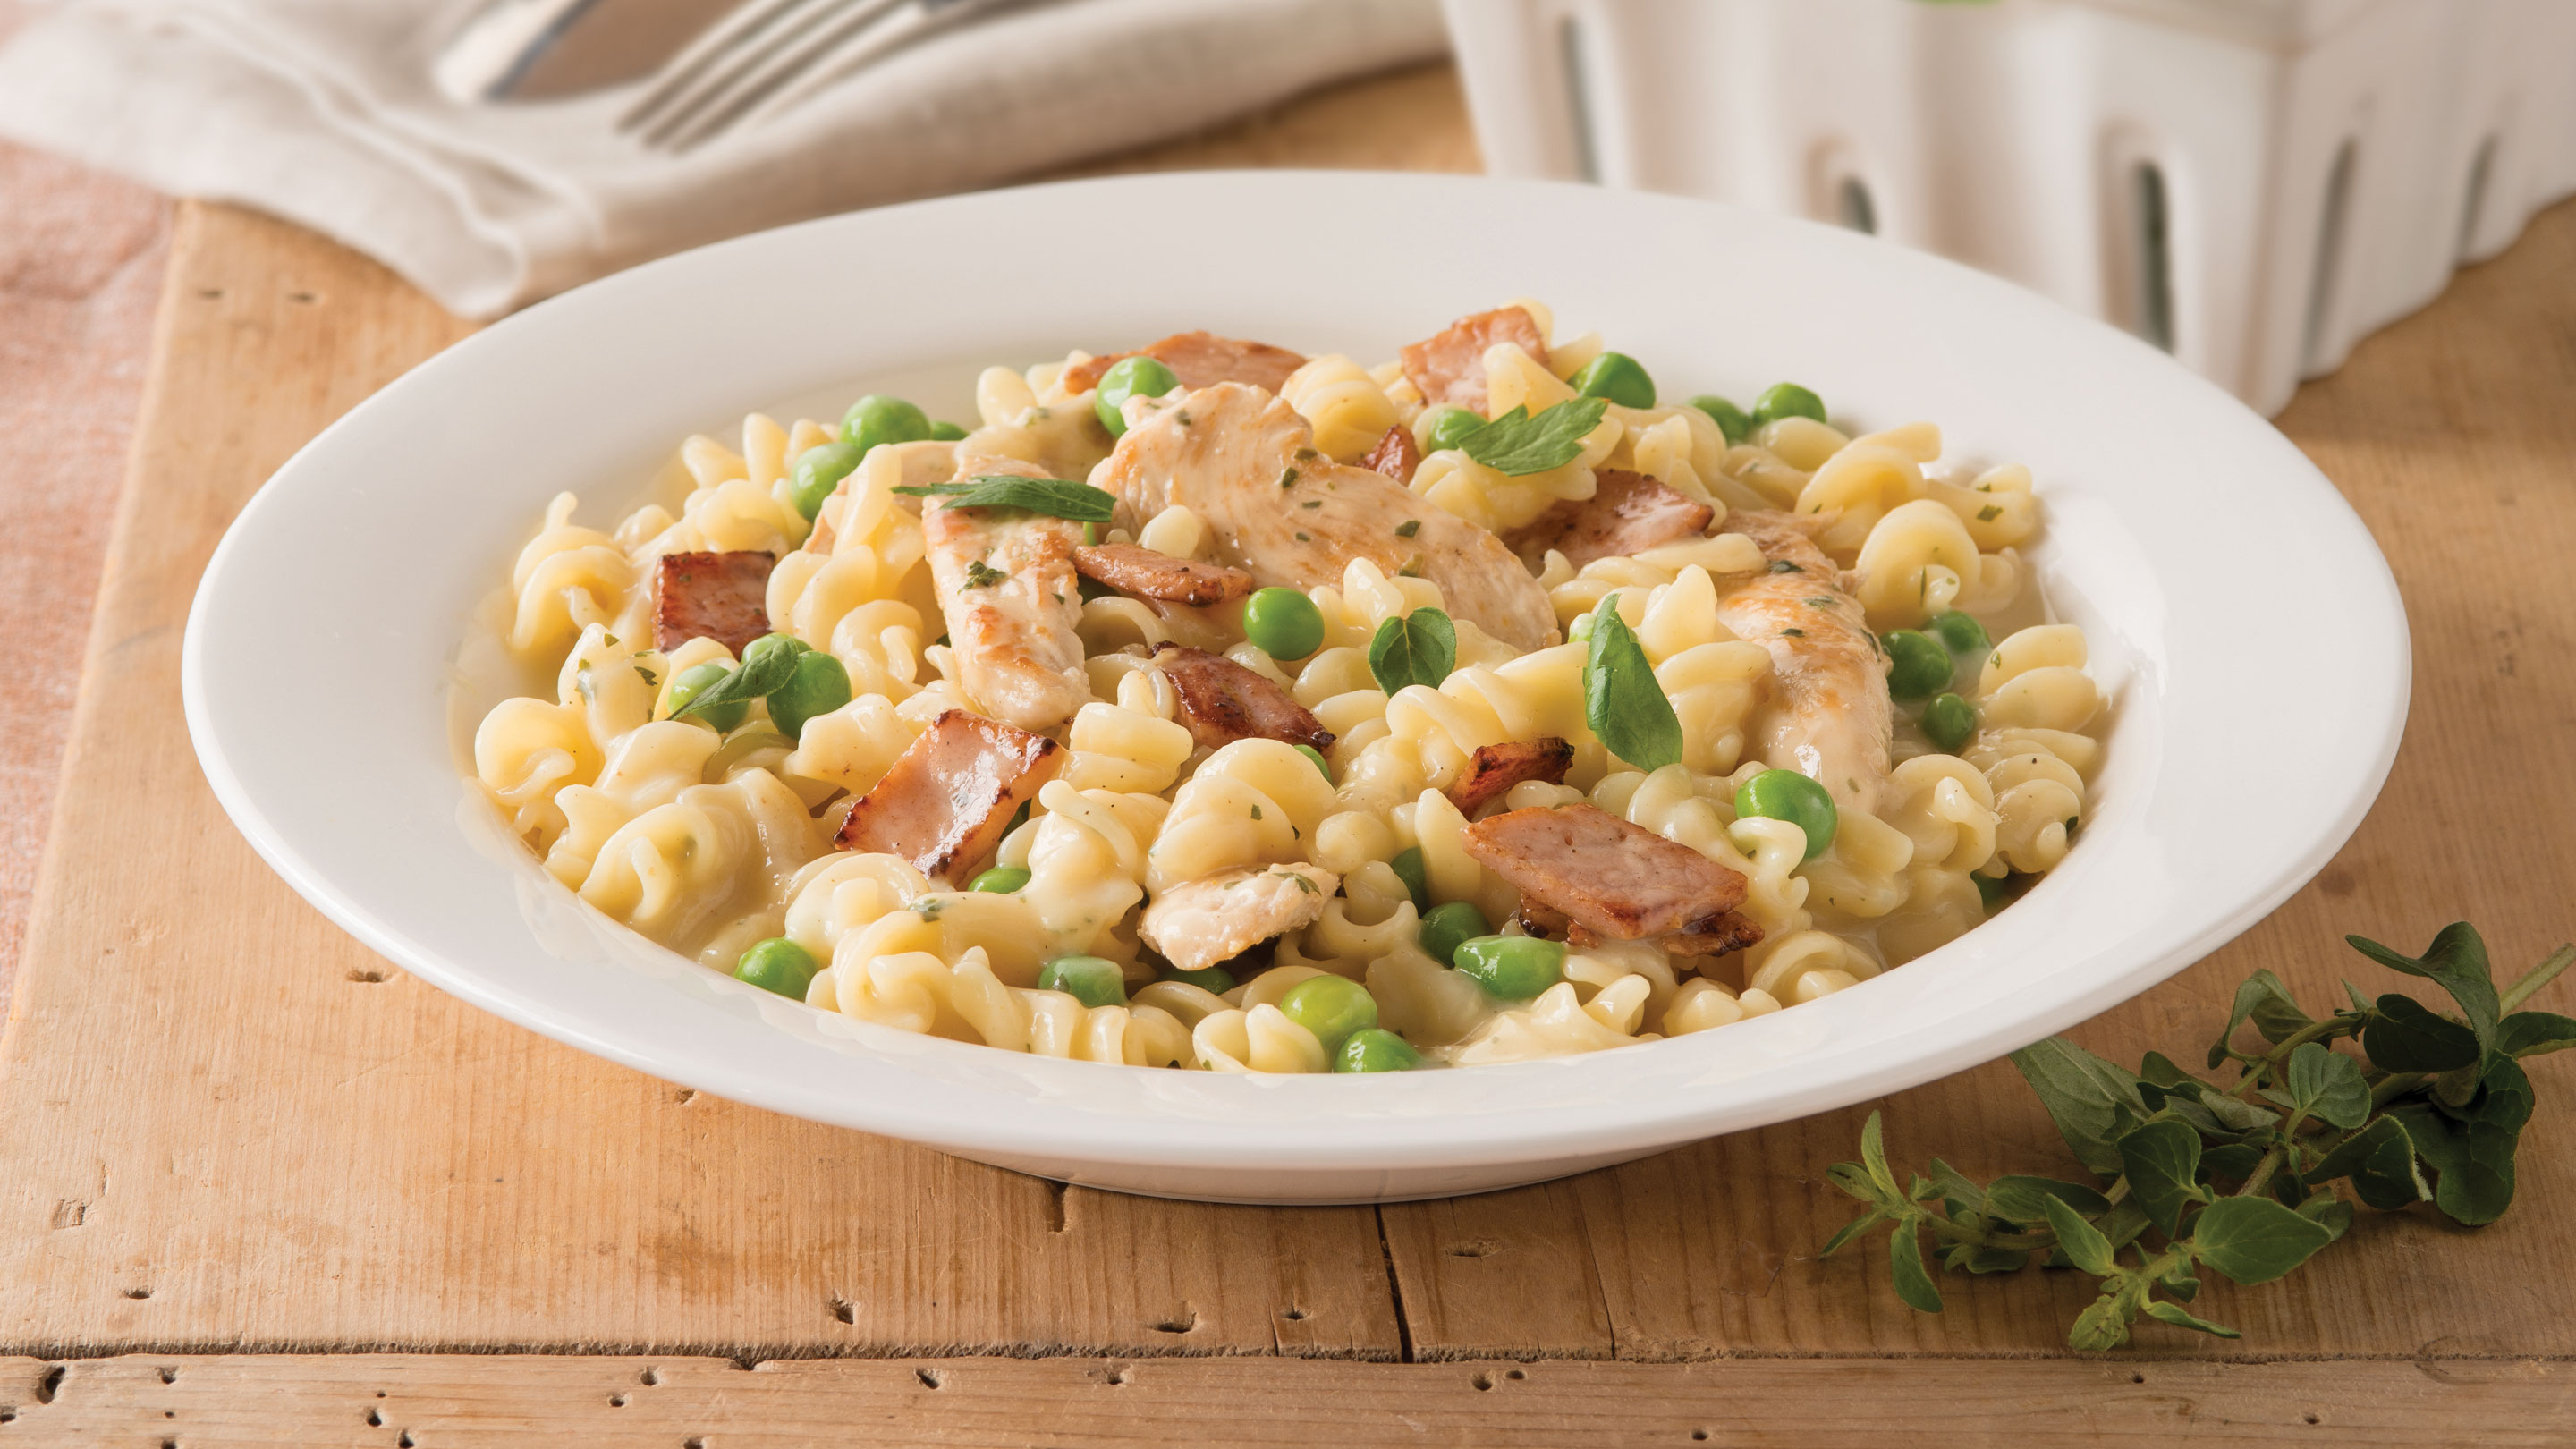 Chicken, Cheese & Bacon Pasta Recipe with Peas